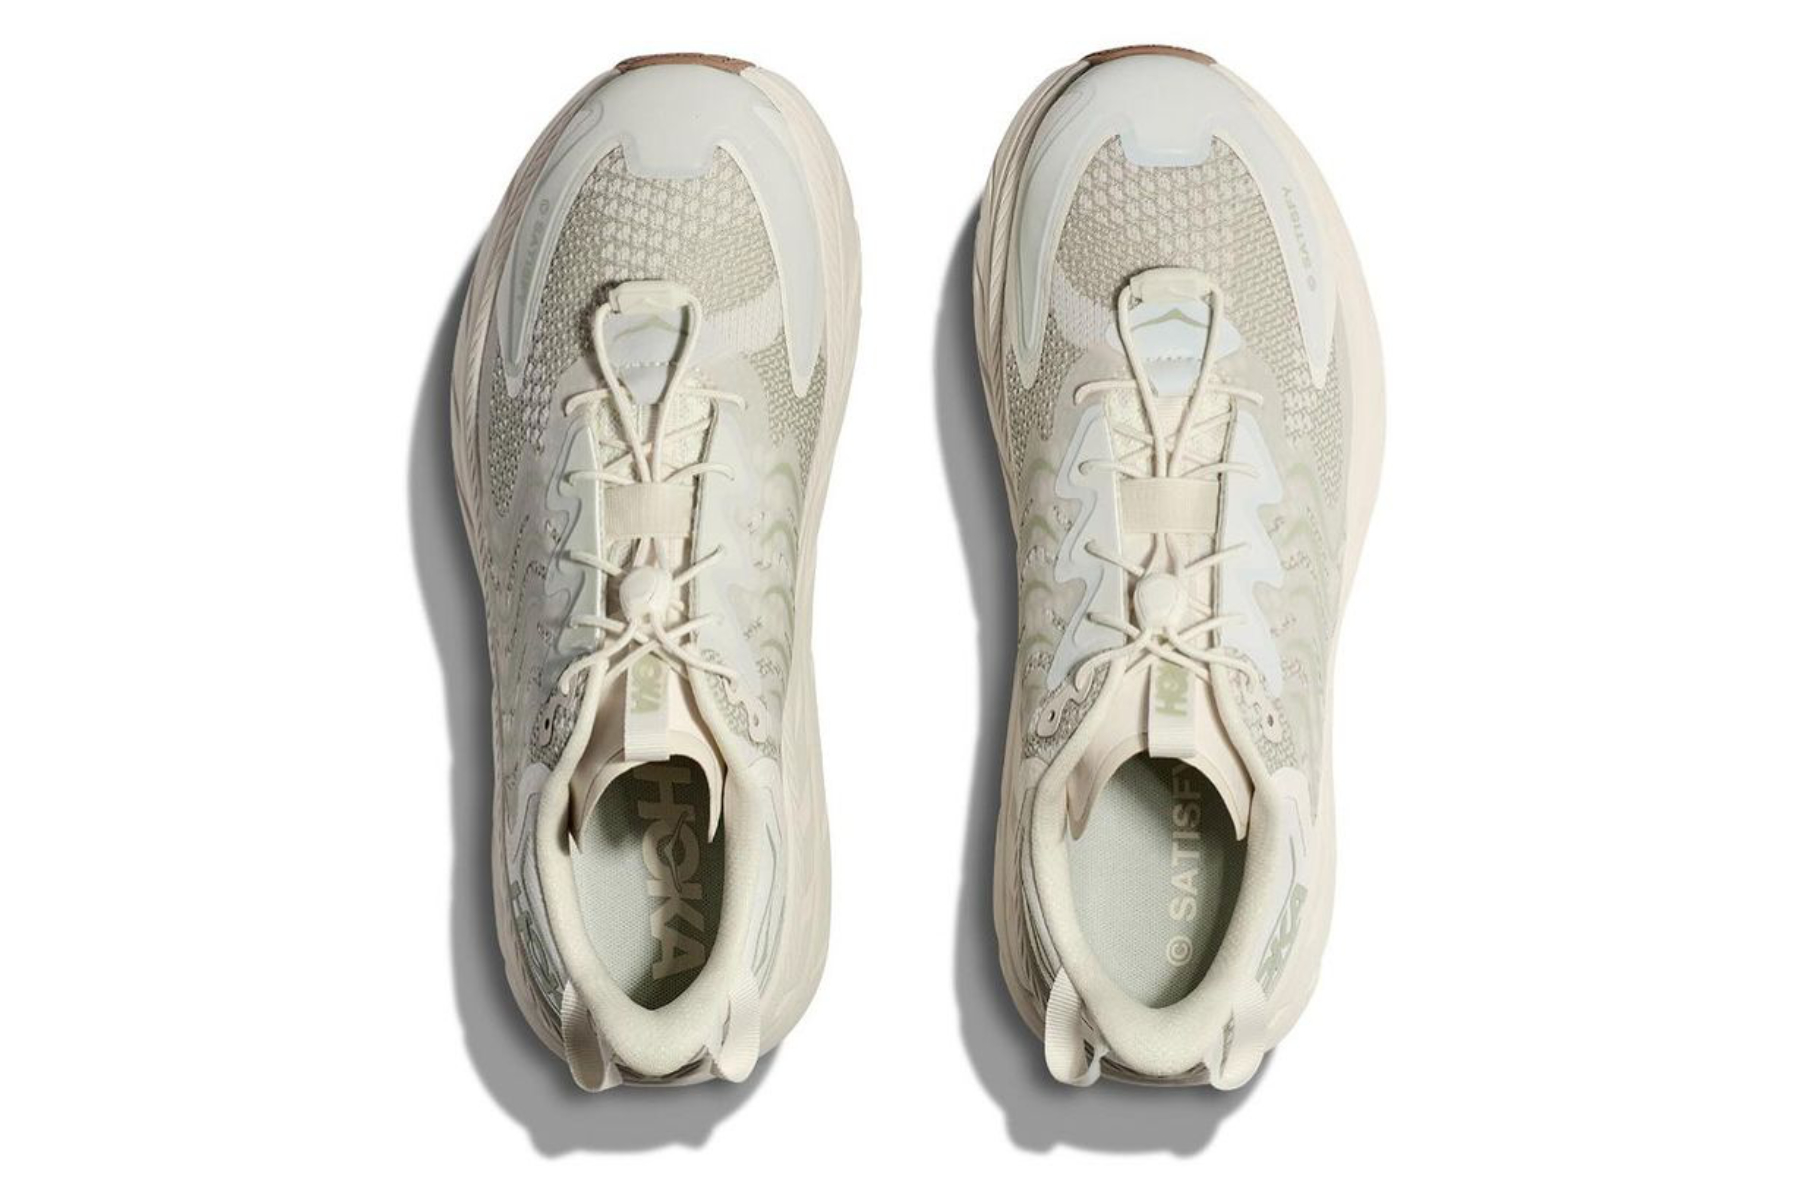 HOKA & Satisfy are teaming up for a collaborative take on the Clifton LS.